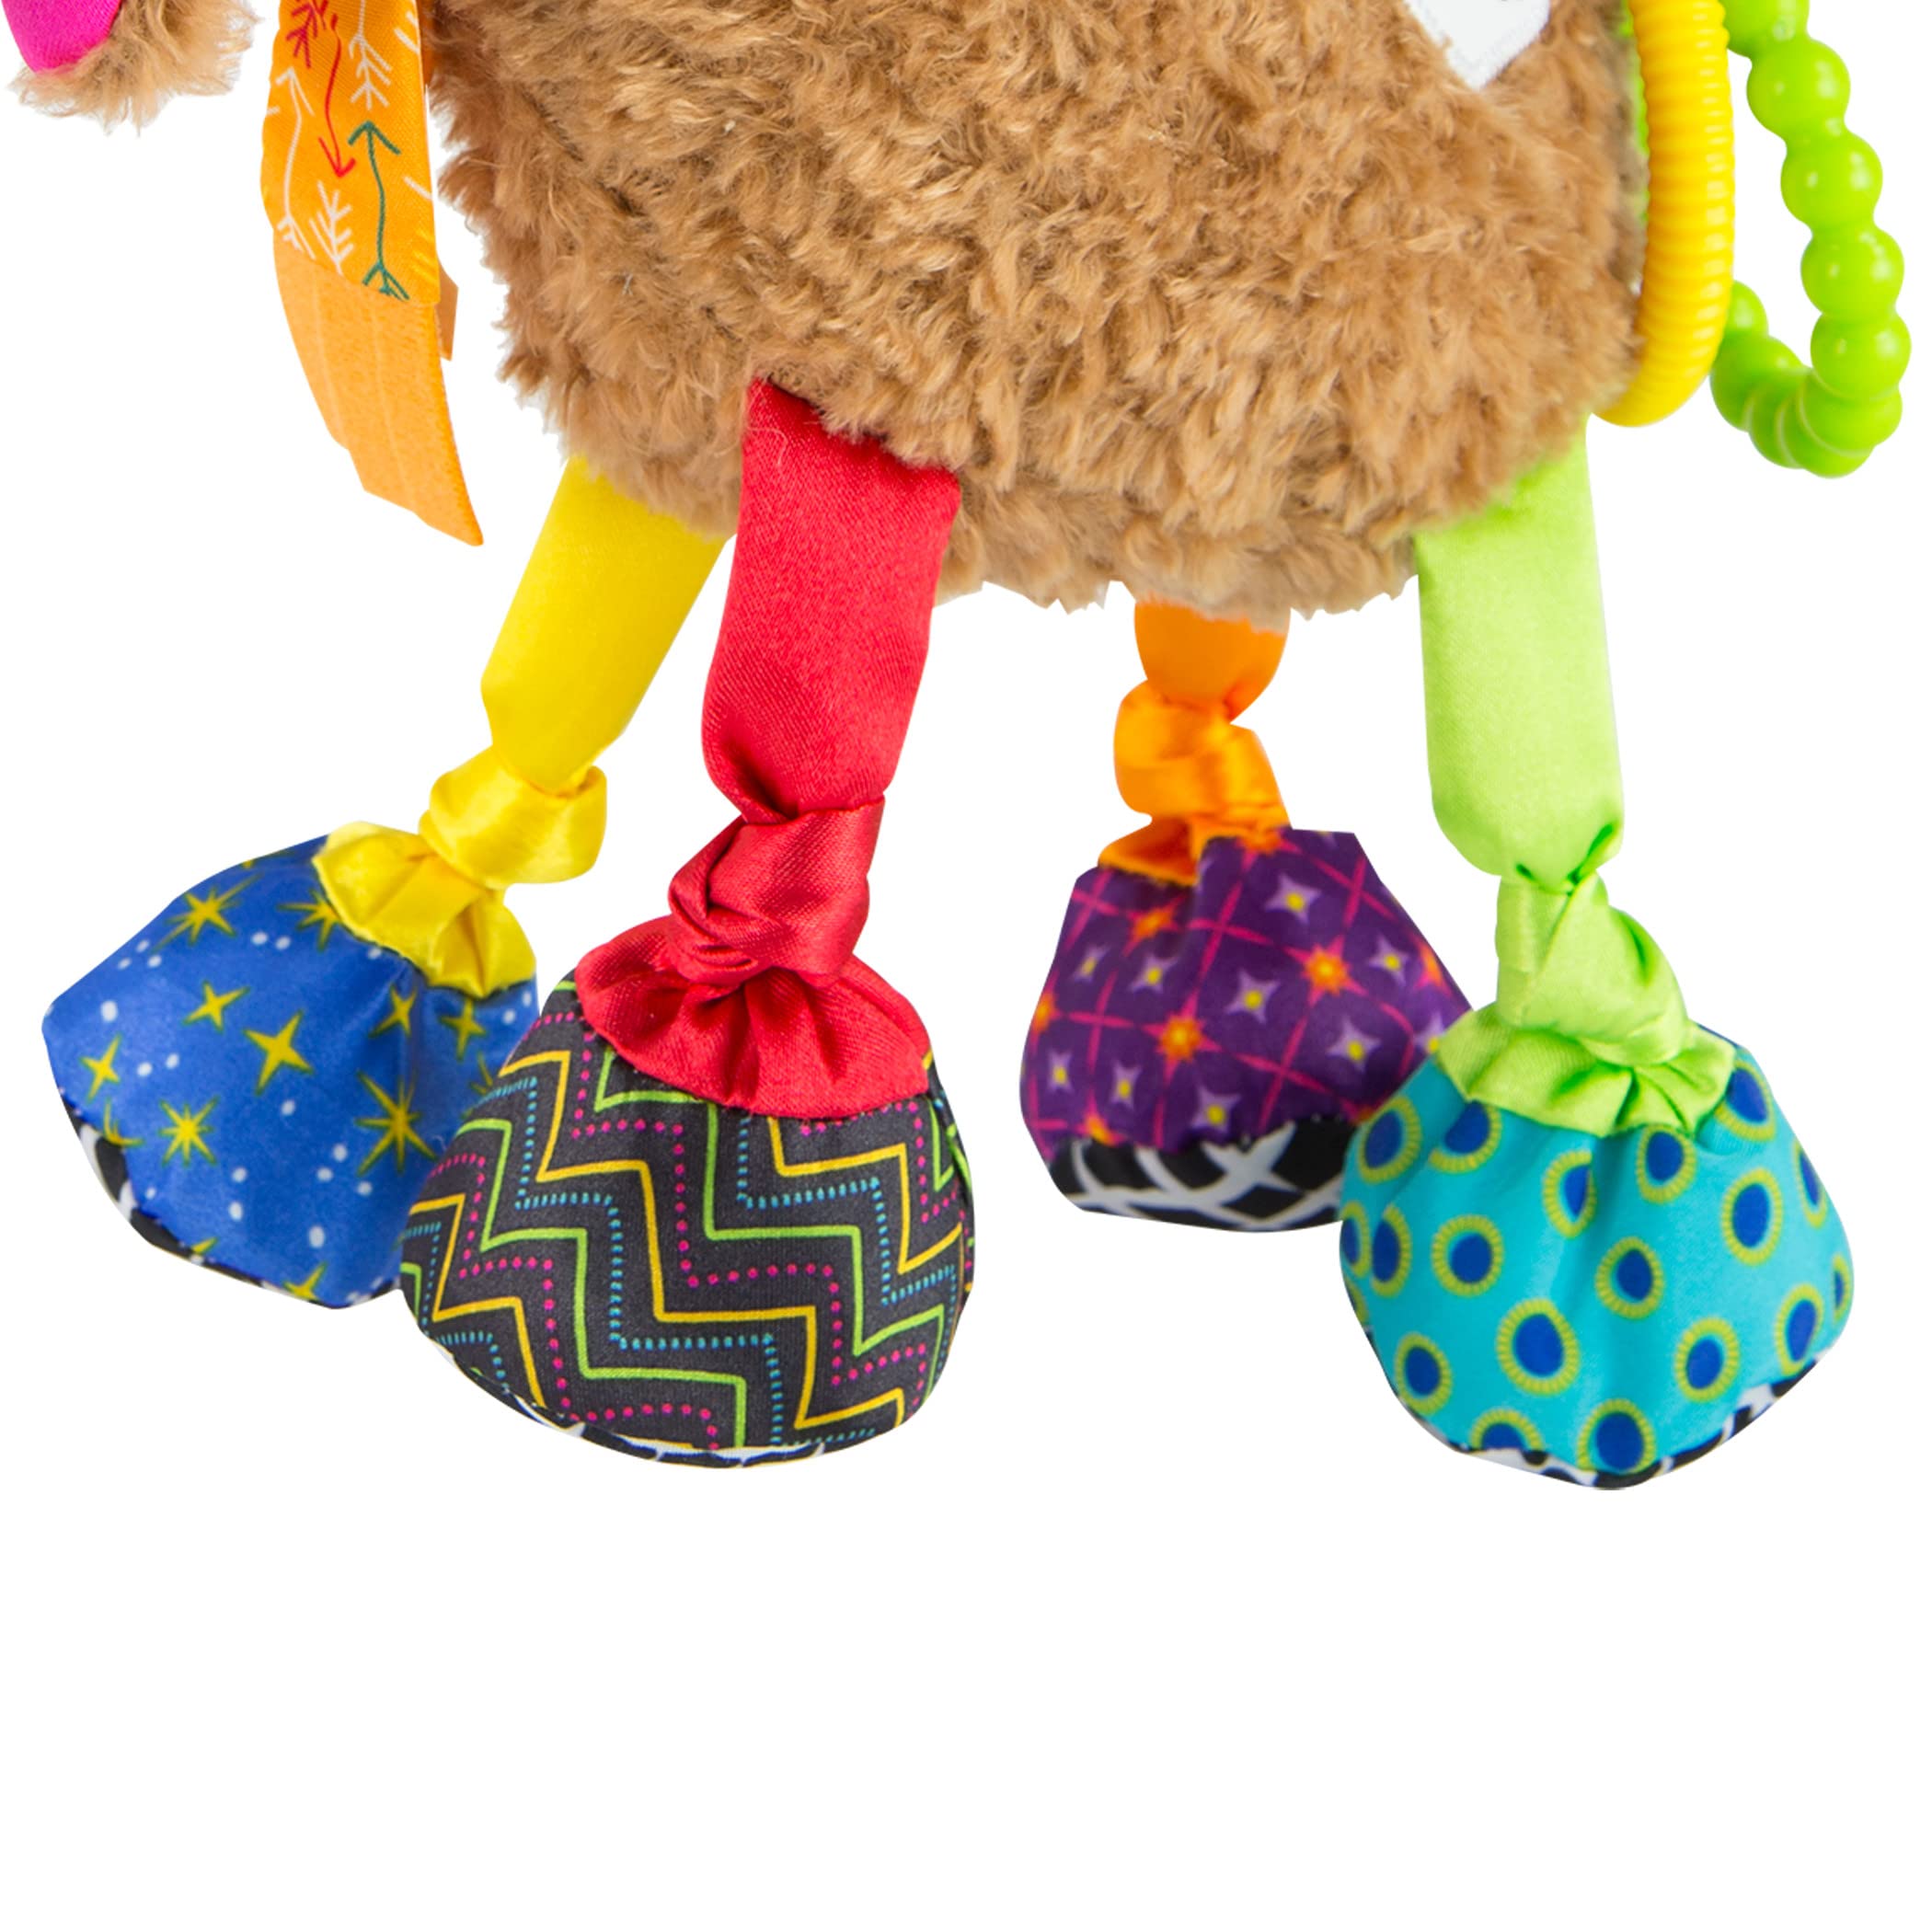 Tomy Lamaze Mortimer The Moose, Clip On Toy